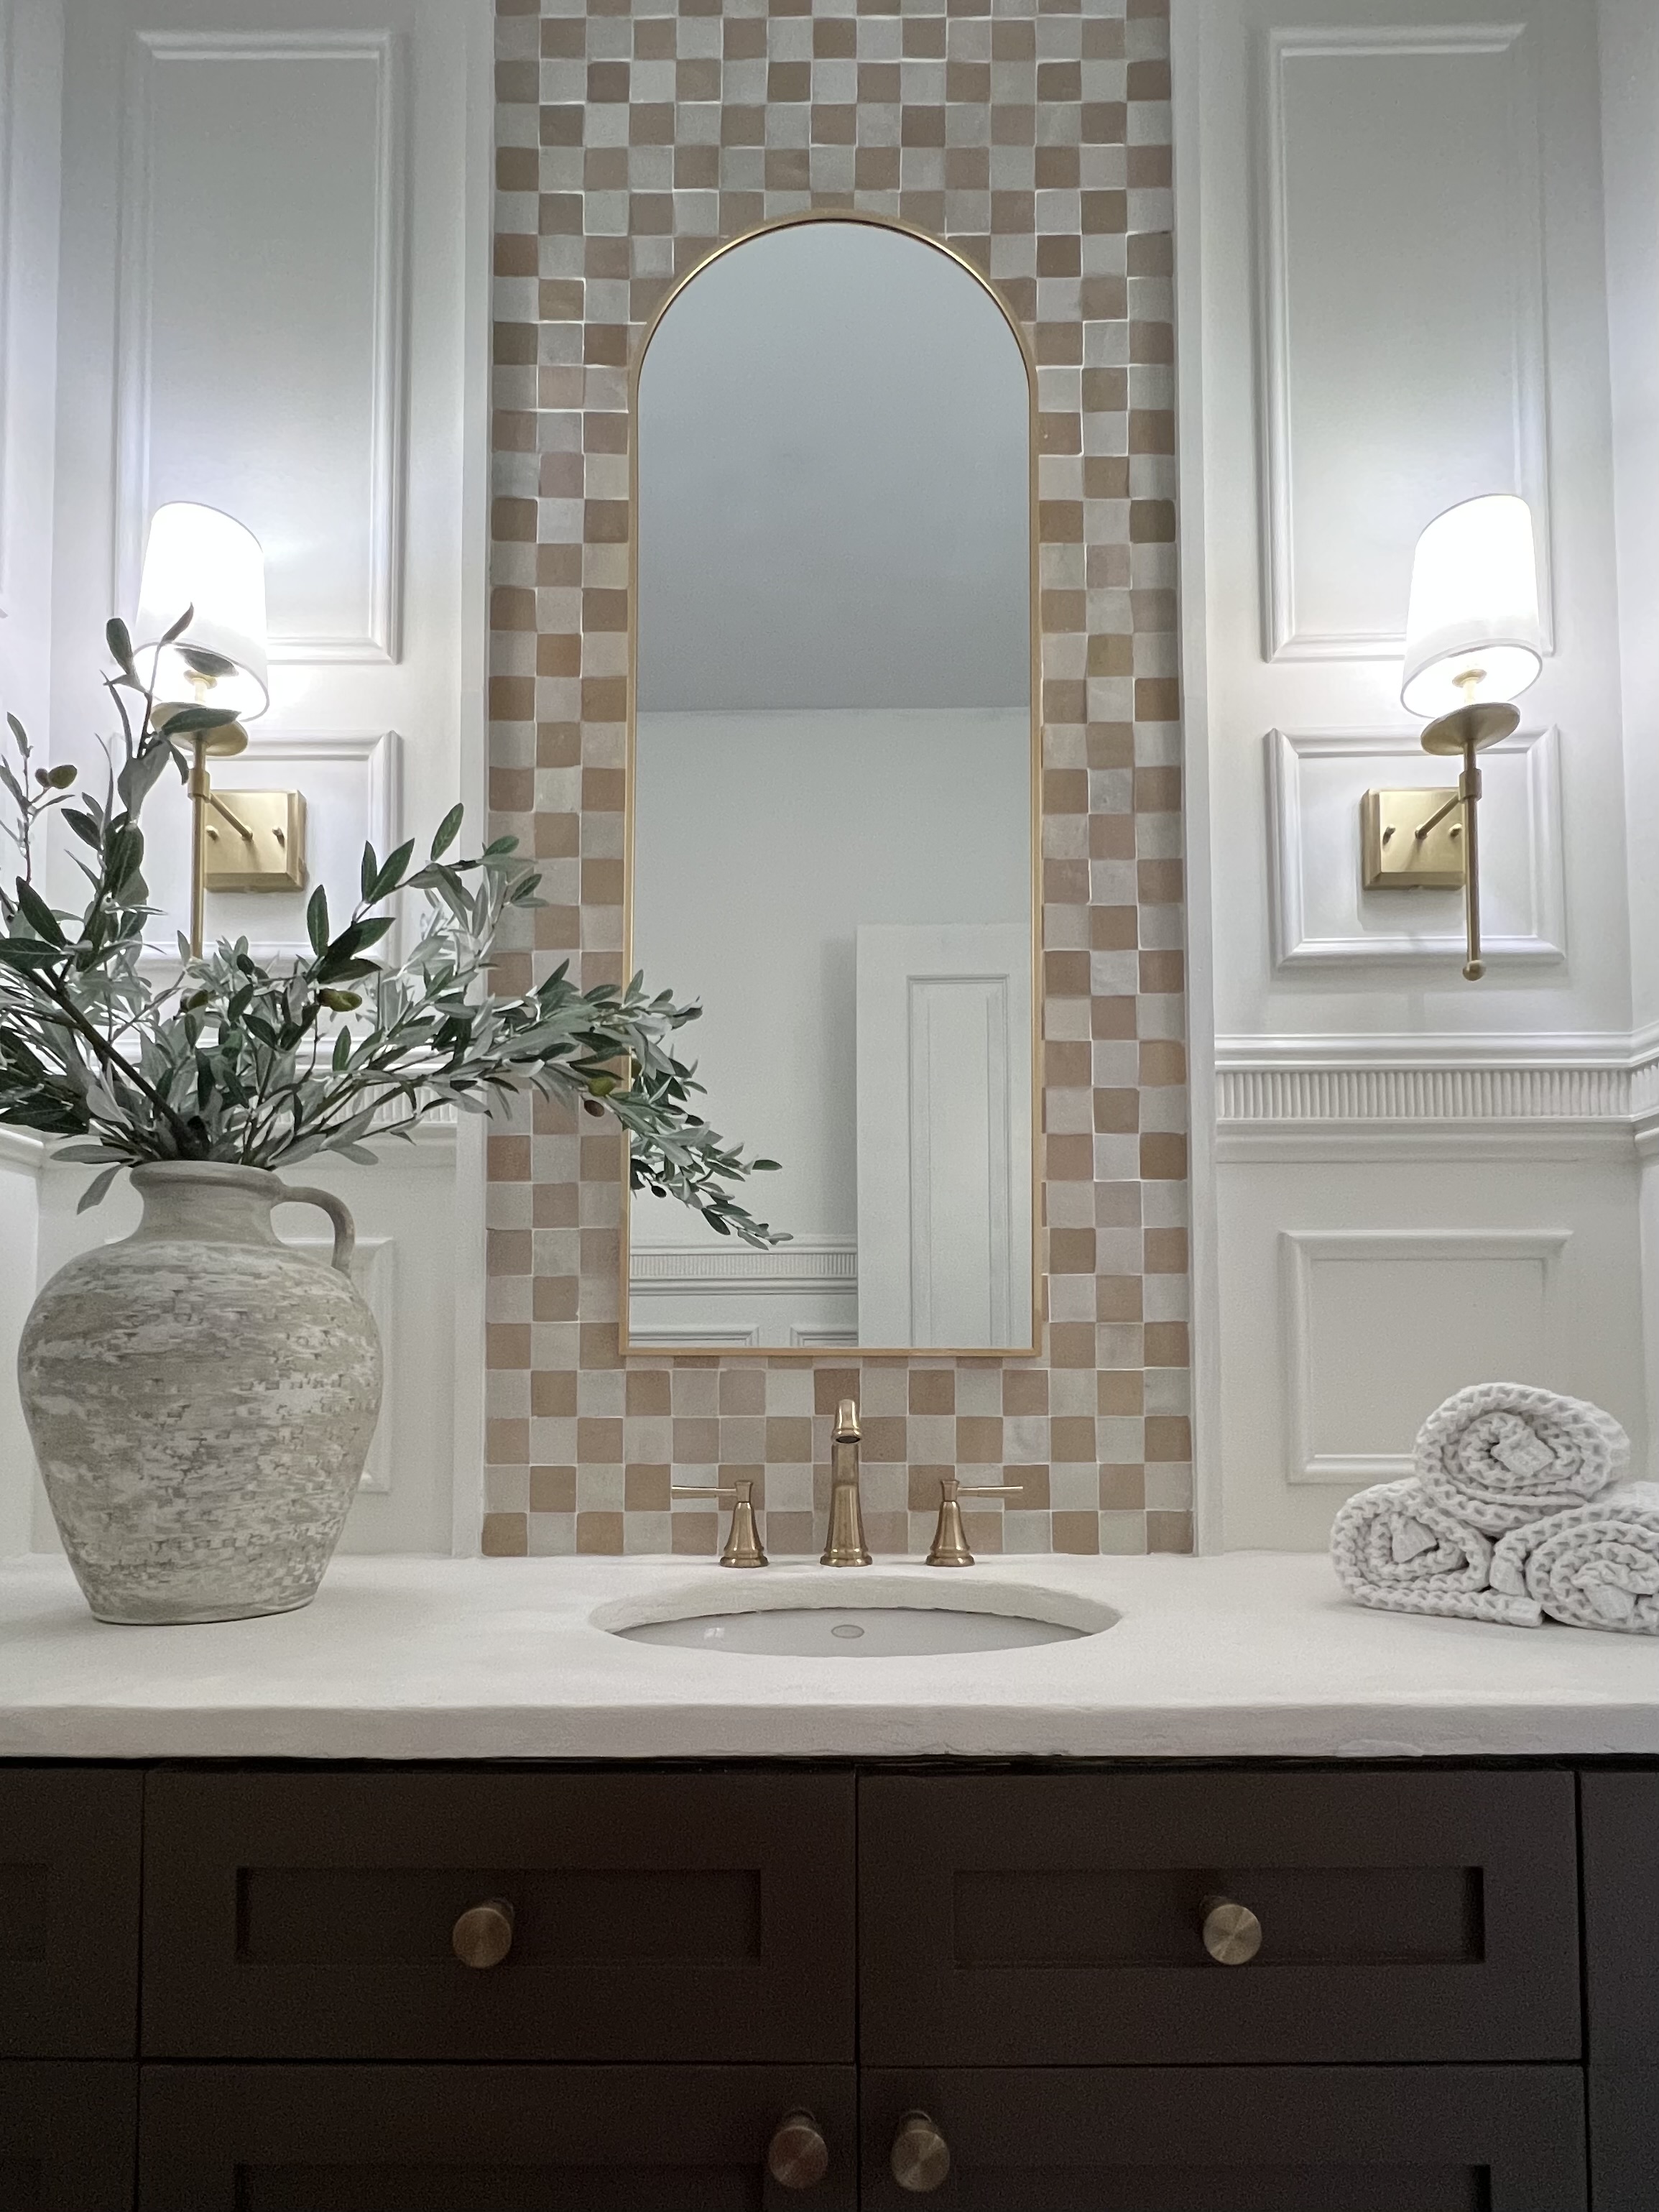 Reveal photo of powder room makeover, with a painted vanity, faux cement countertop, decorative wall trimwork, and Zellige checkerboard tile.